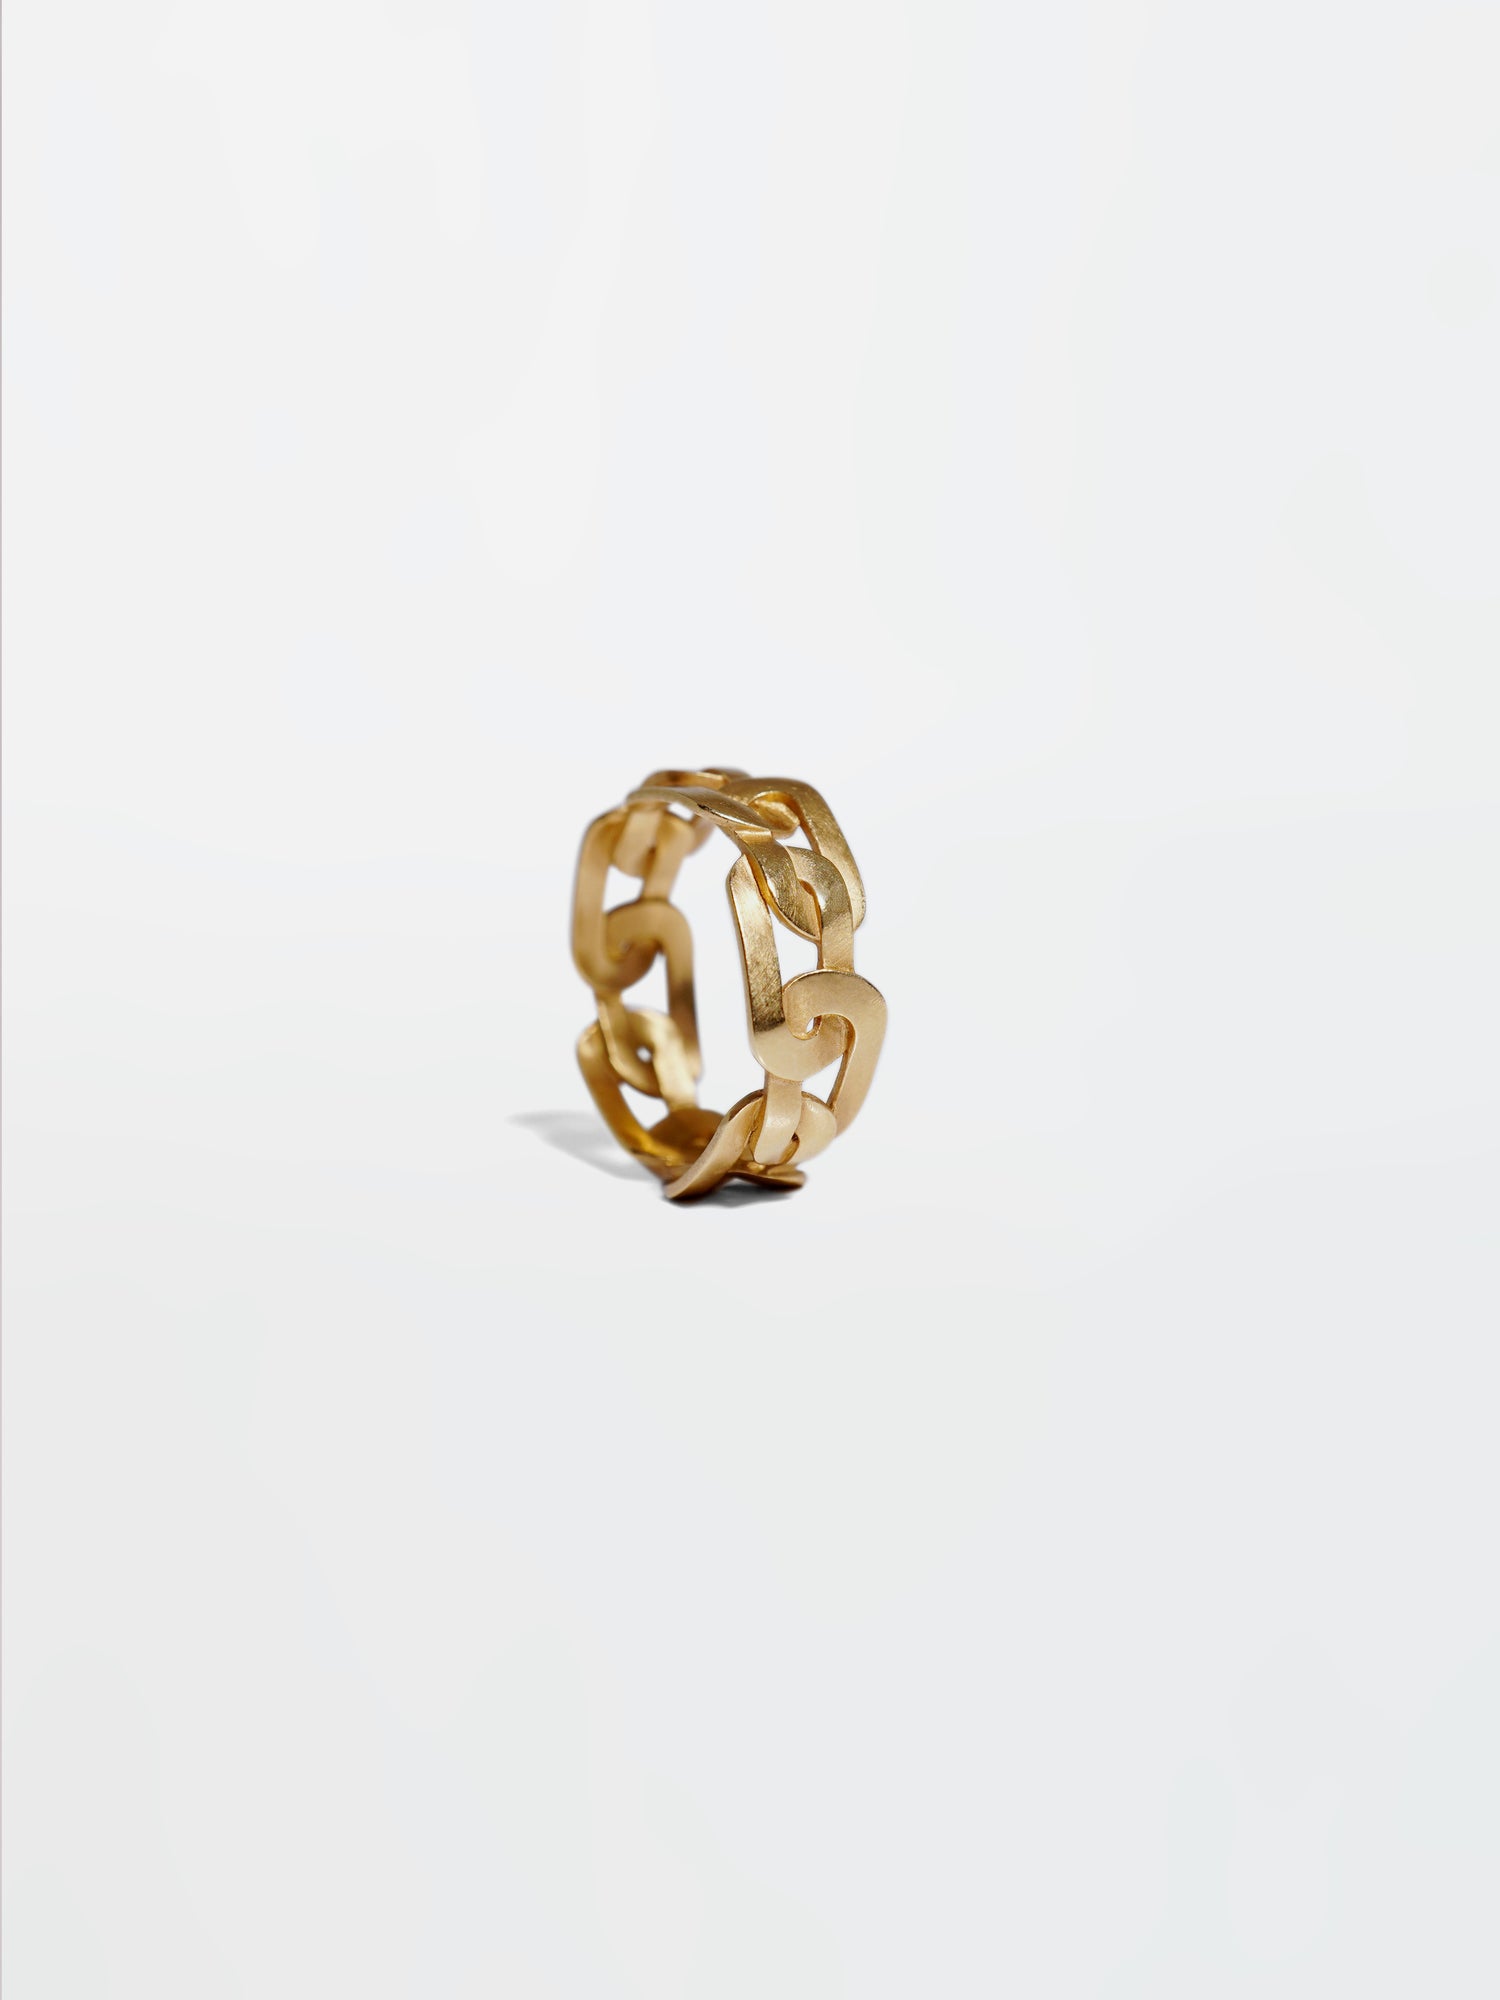 JOINT_Ring_7.0MM